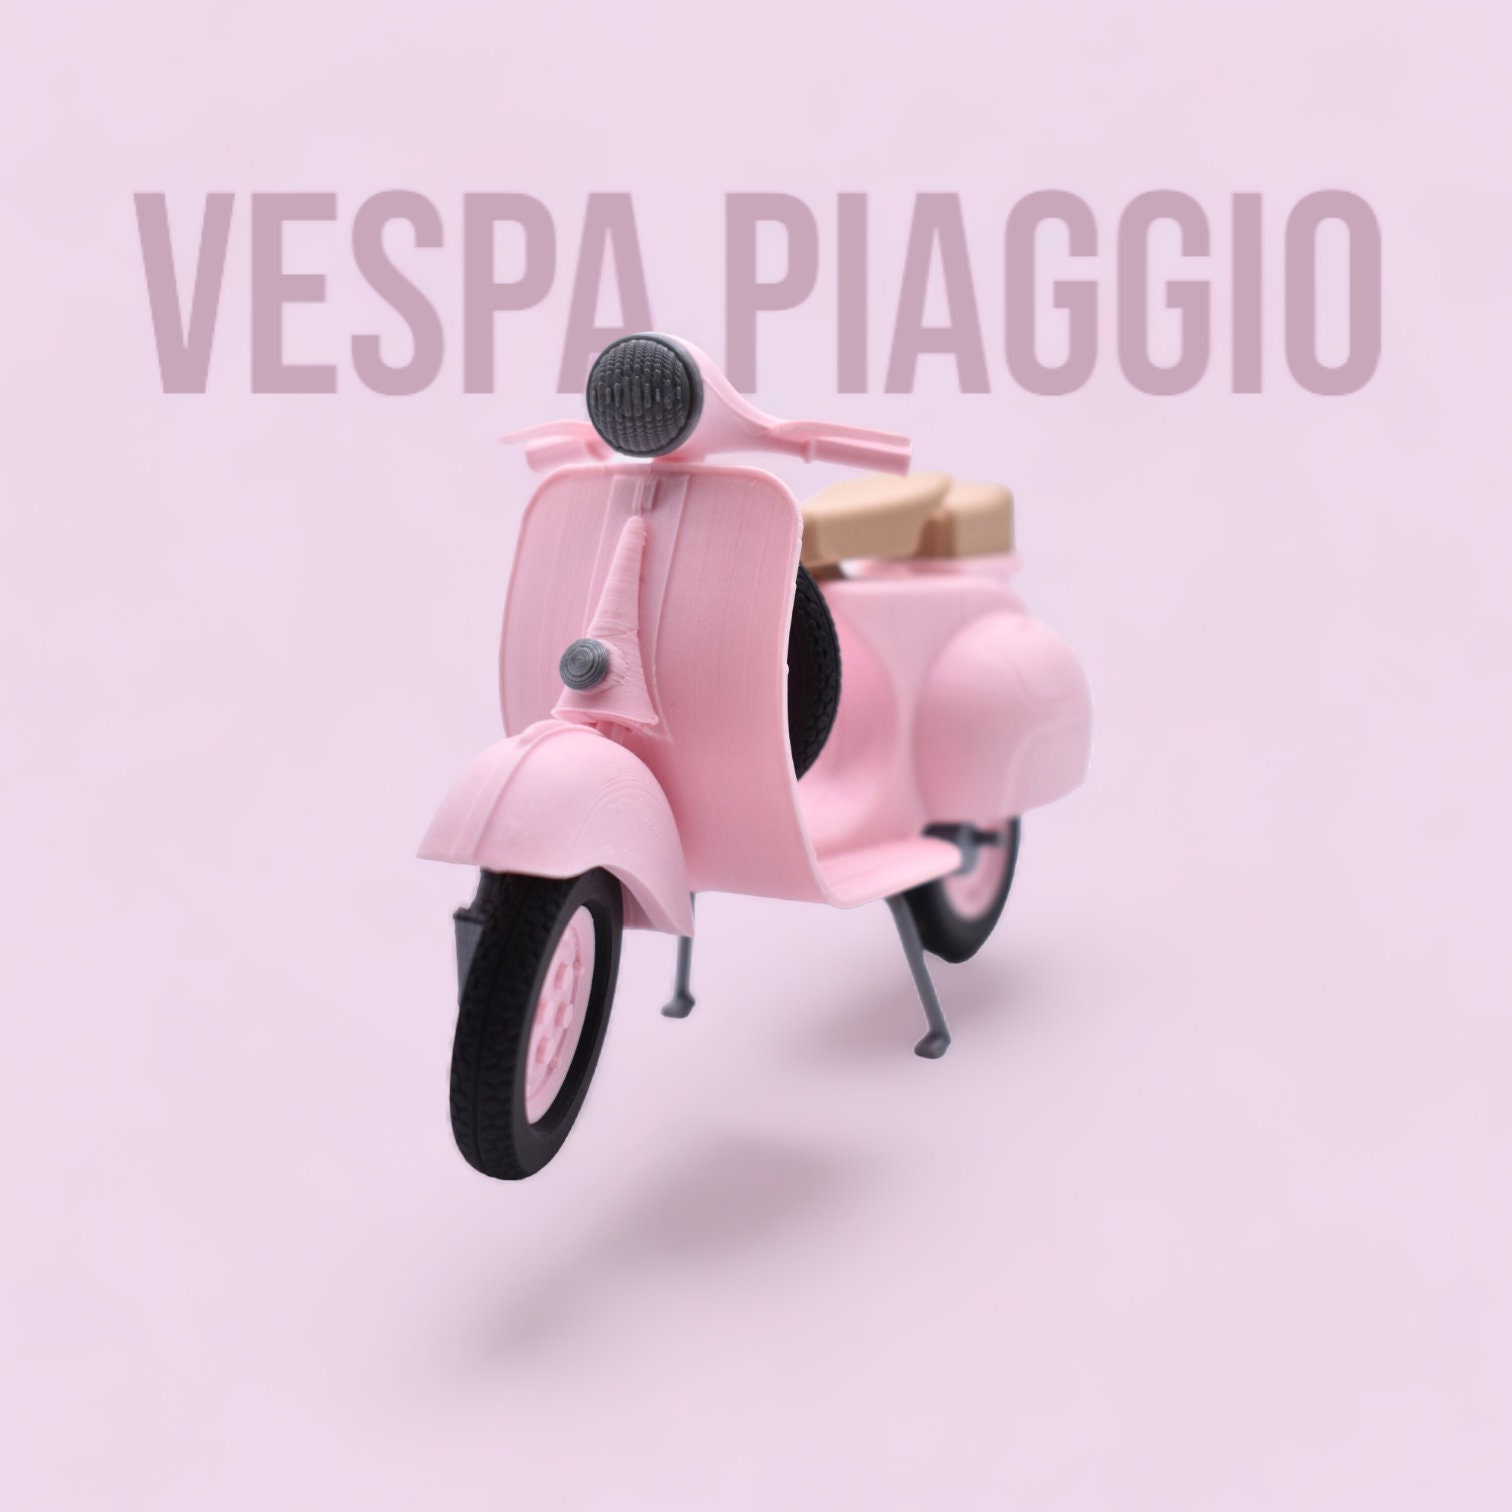 Vespa Piaggio Scooter 3d Printed Customised Vintage Scooter Classic Scooter  